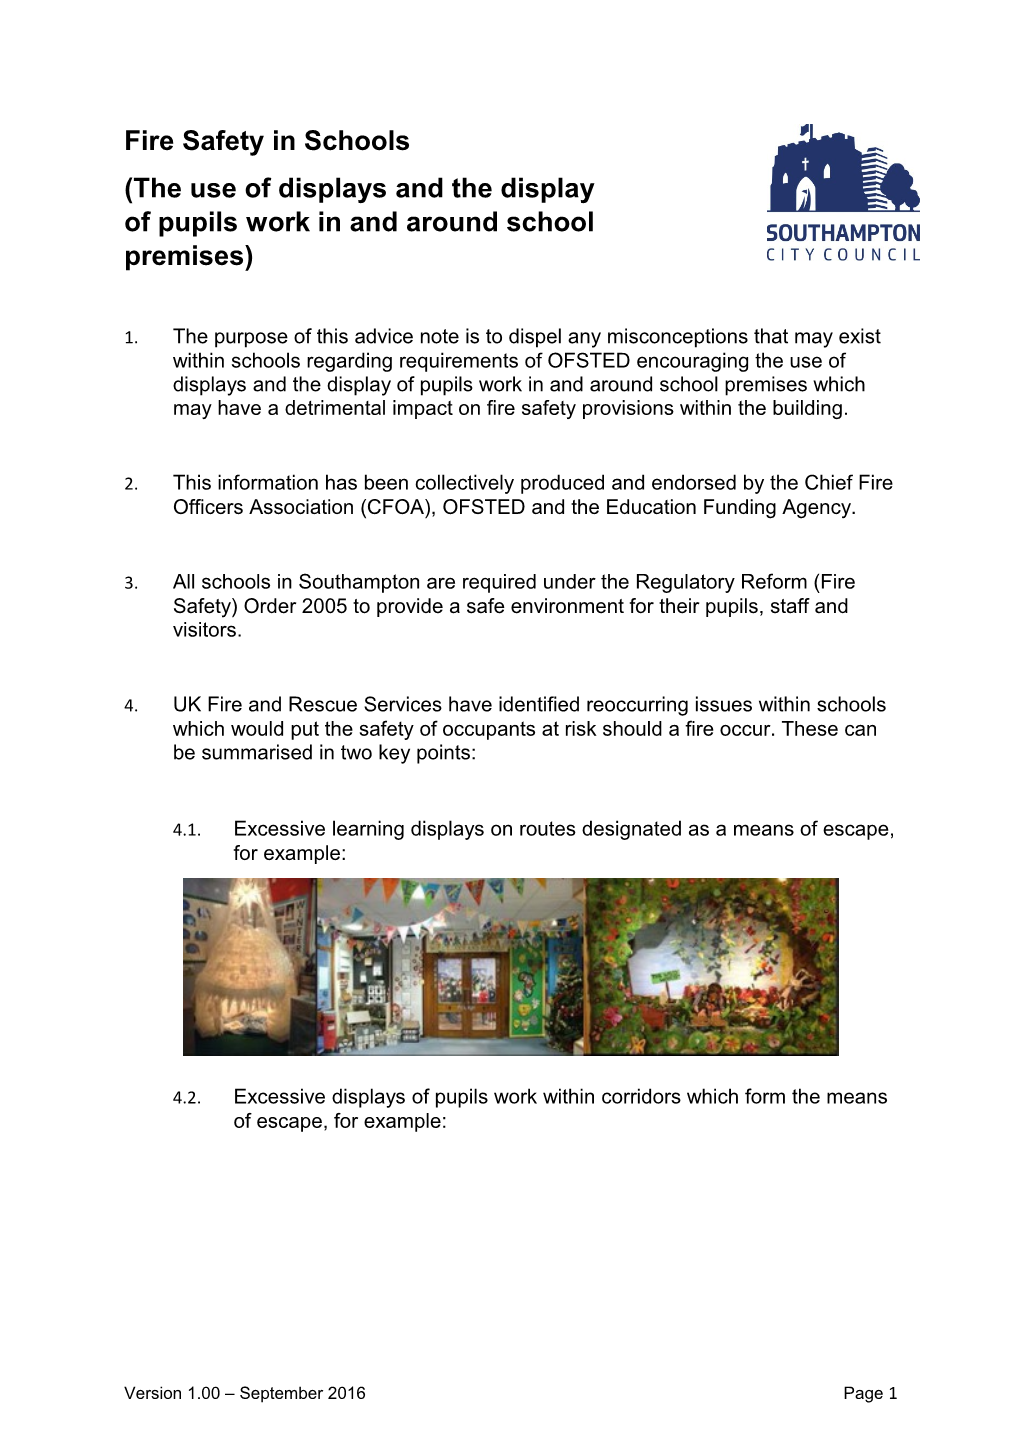 The Use of Displays and the Display of Pupils Work in and Around School Premises